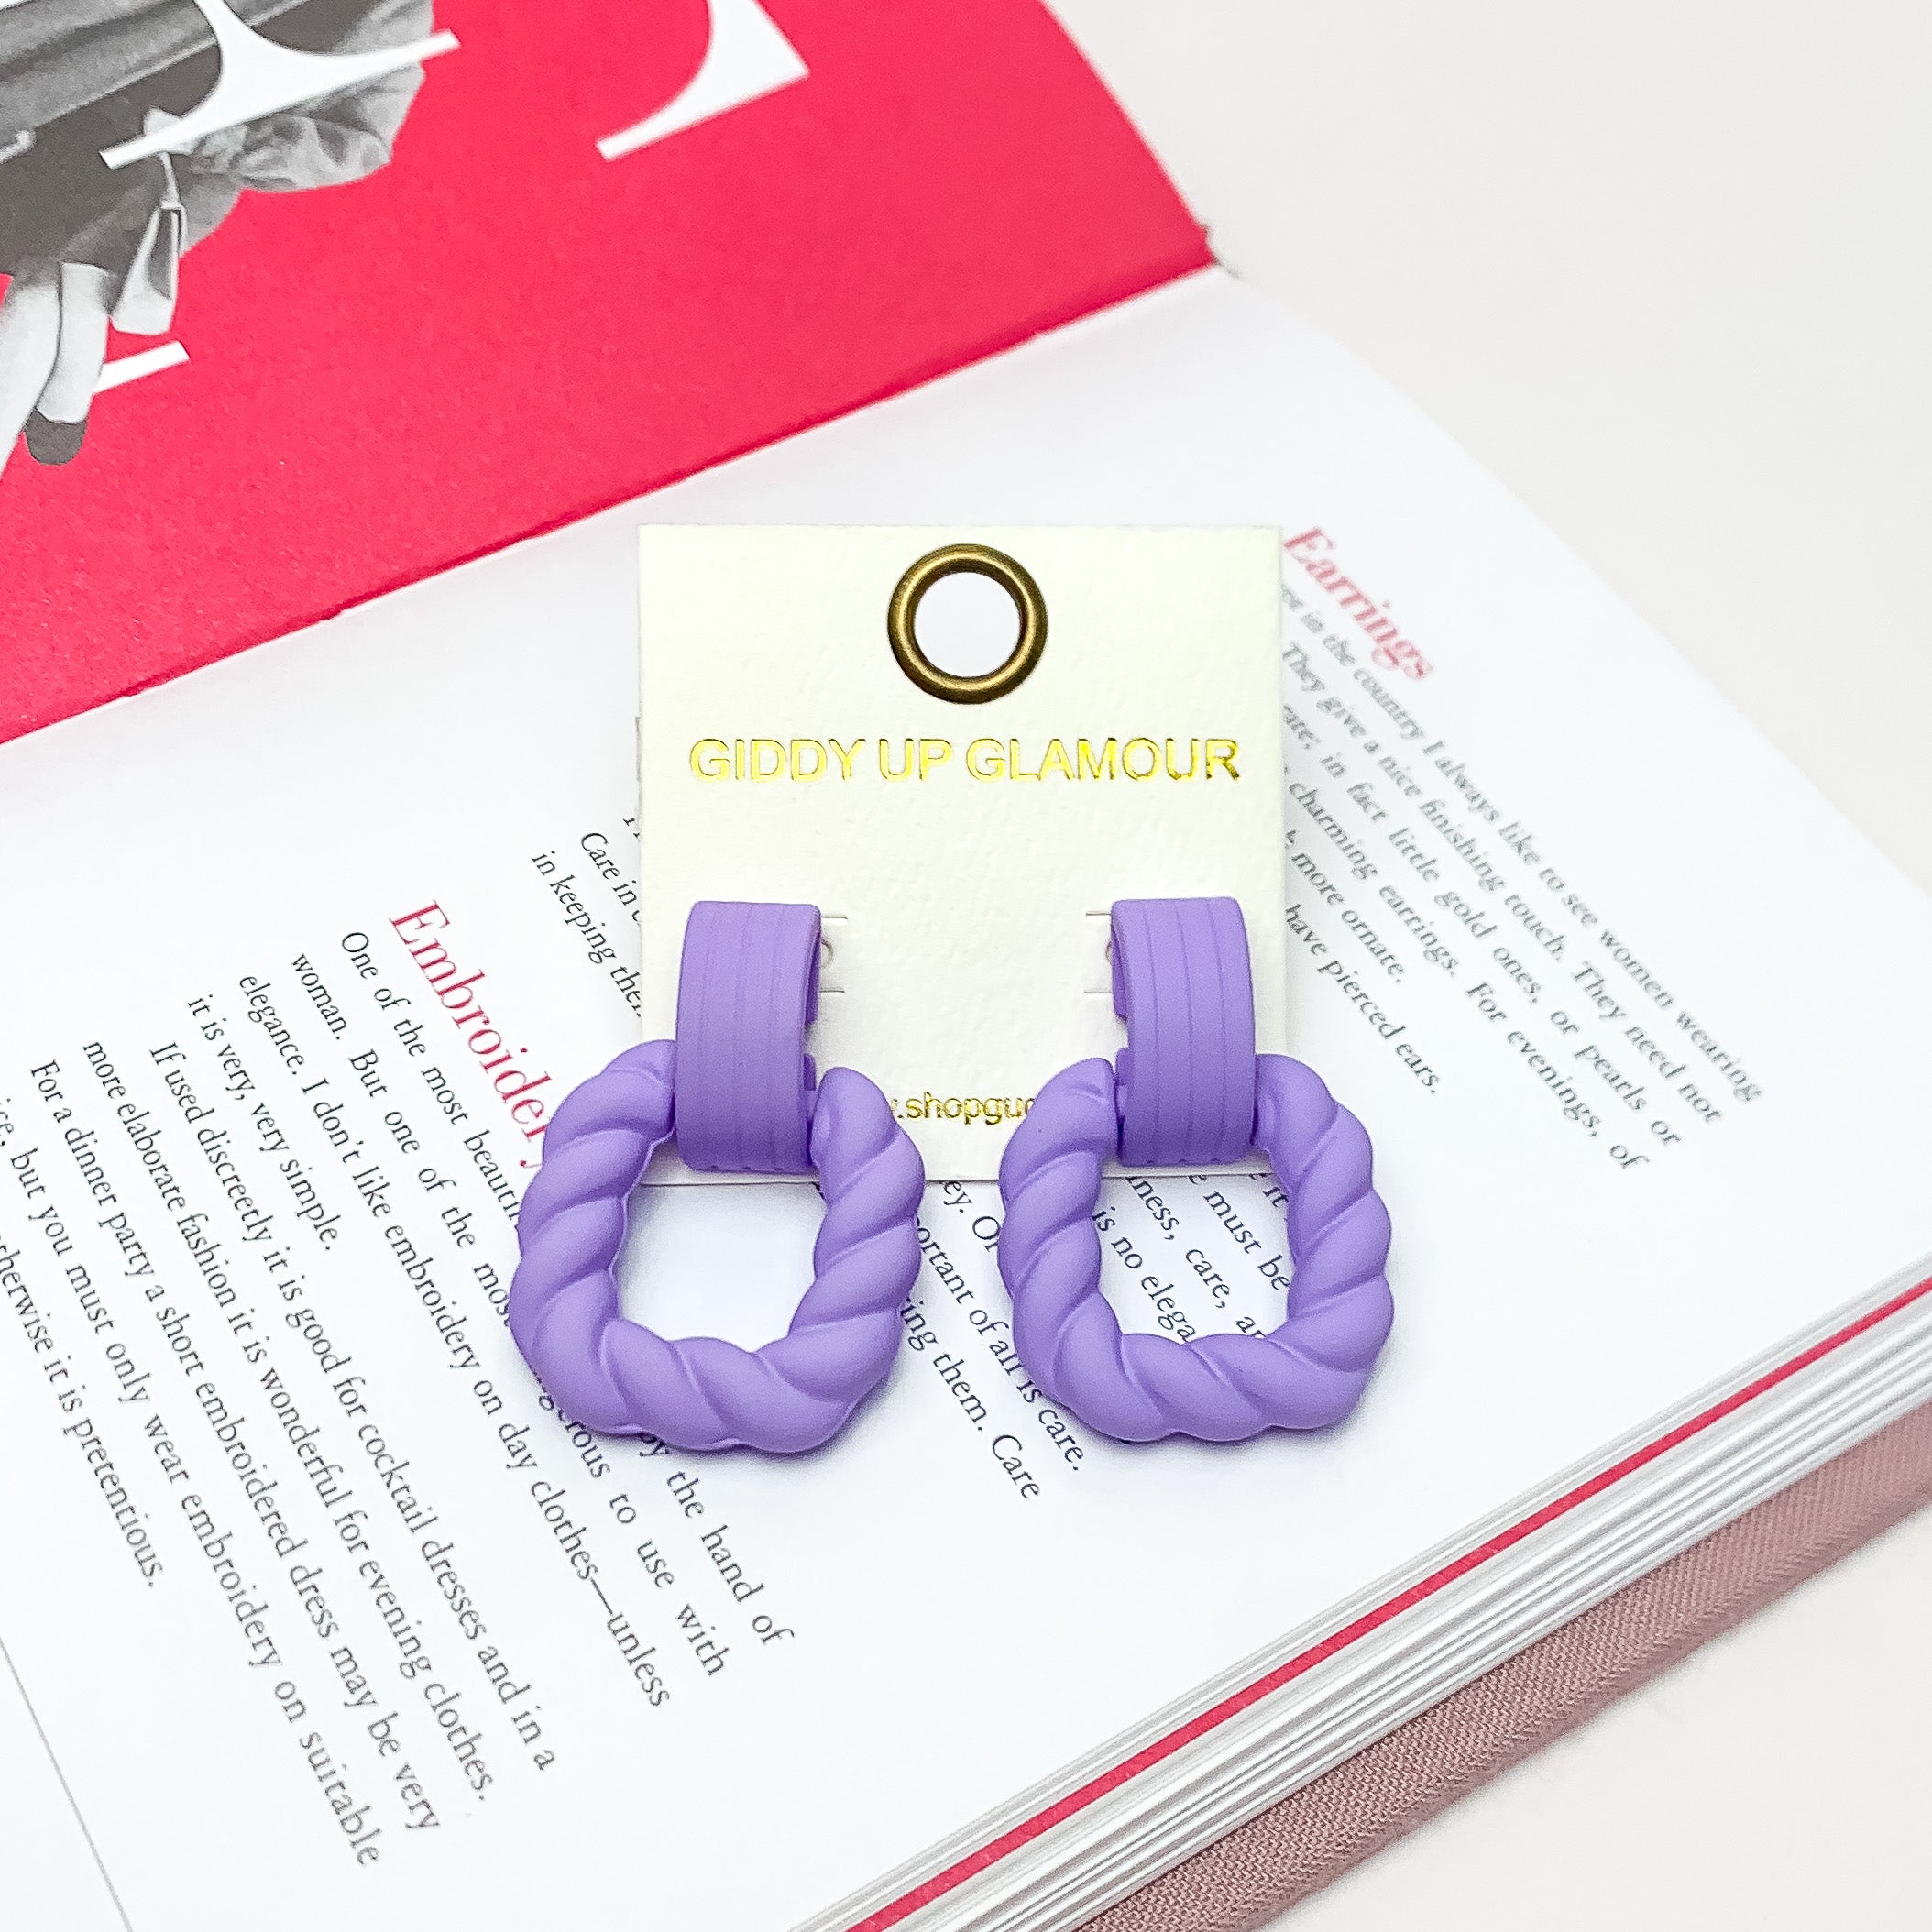 Ready to Party Twisted Square Earrings in Lavender. Pictured on an open page of a book.